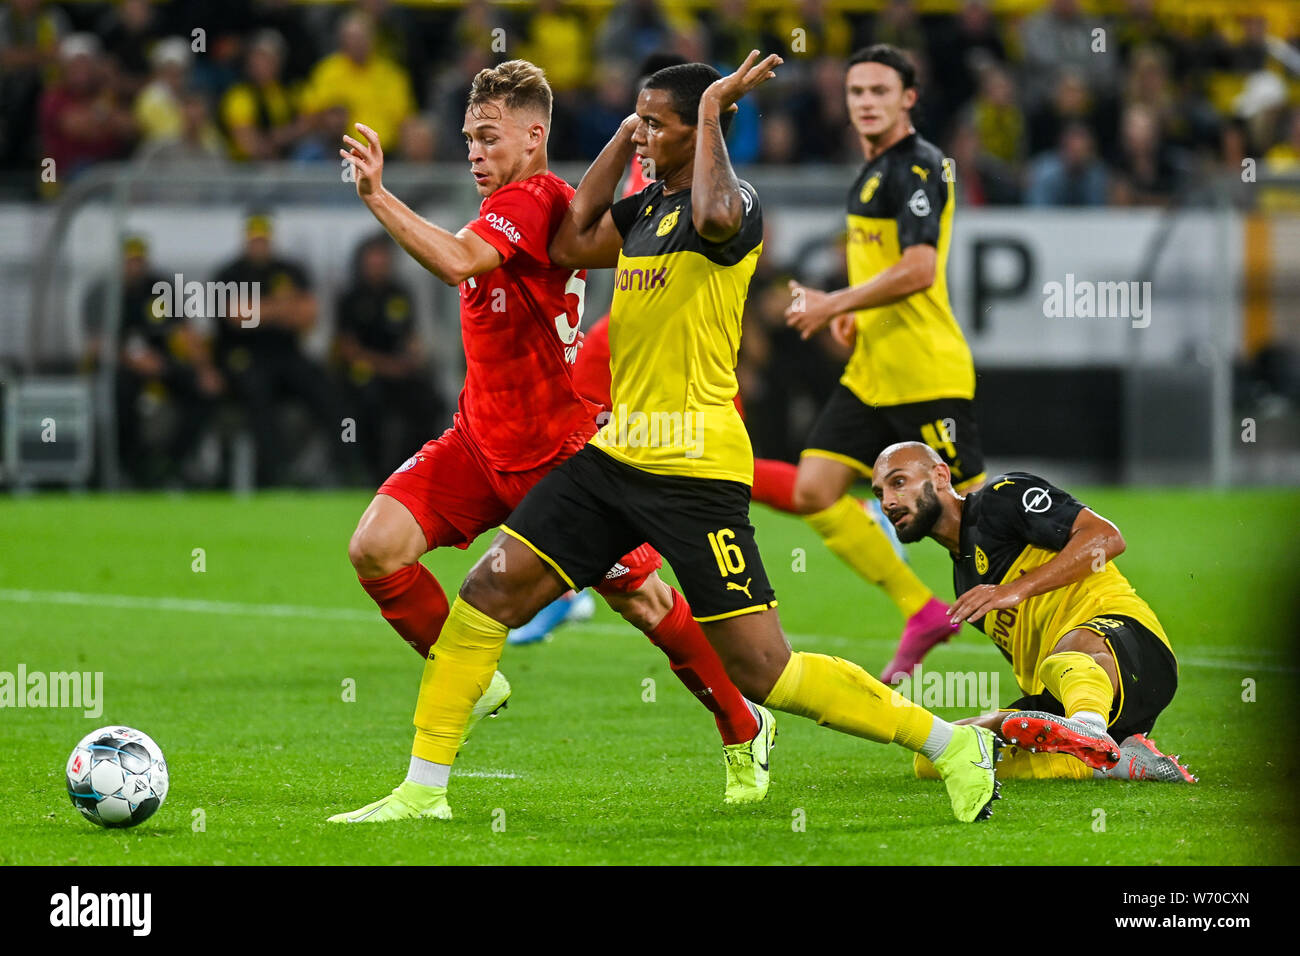 Joshua Kimmich from Bayern Munich (L) and Manuel Akanji from Borussia Dortmund (R) are seen in action during the Germany Supercup Final 2019 match between Borussia Dortmund and Bayern Munich.(Final score: Borussia Dortmund 2:0 Bayern Munich) Stock Photo